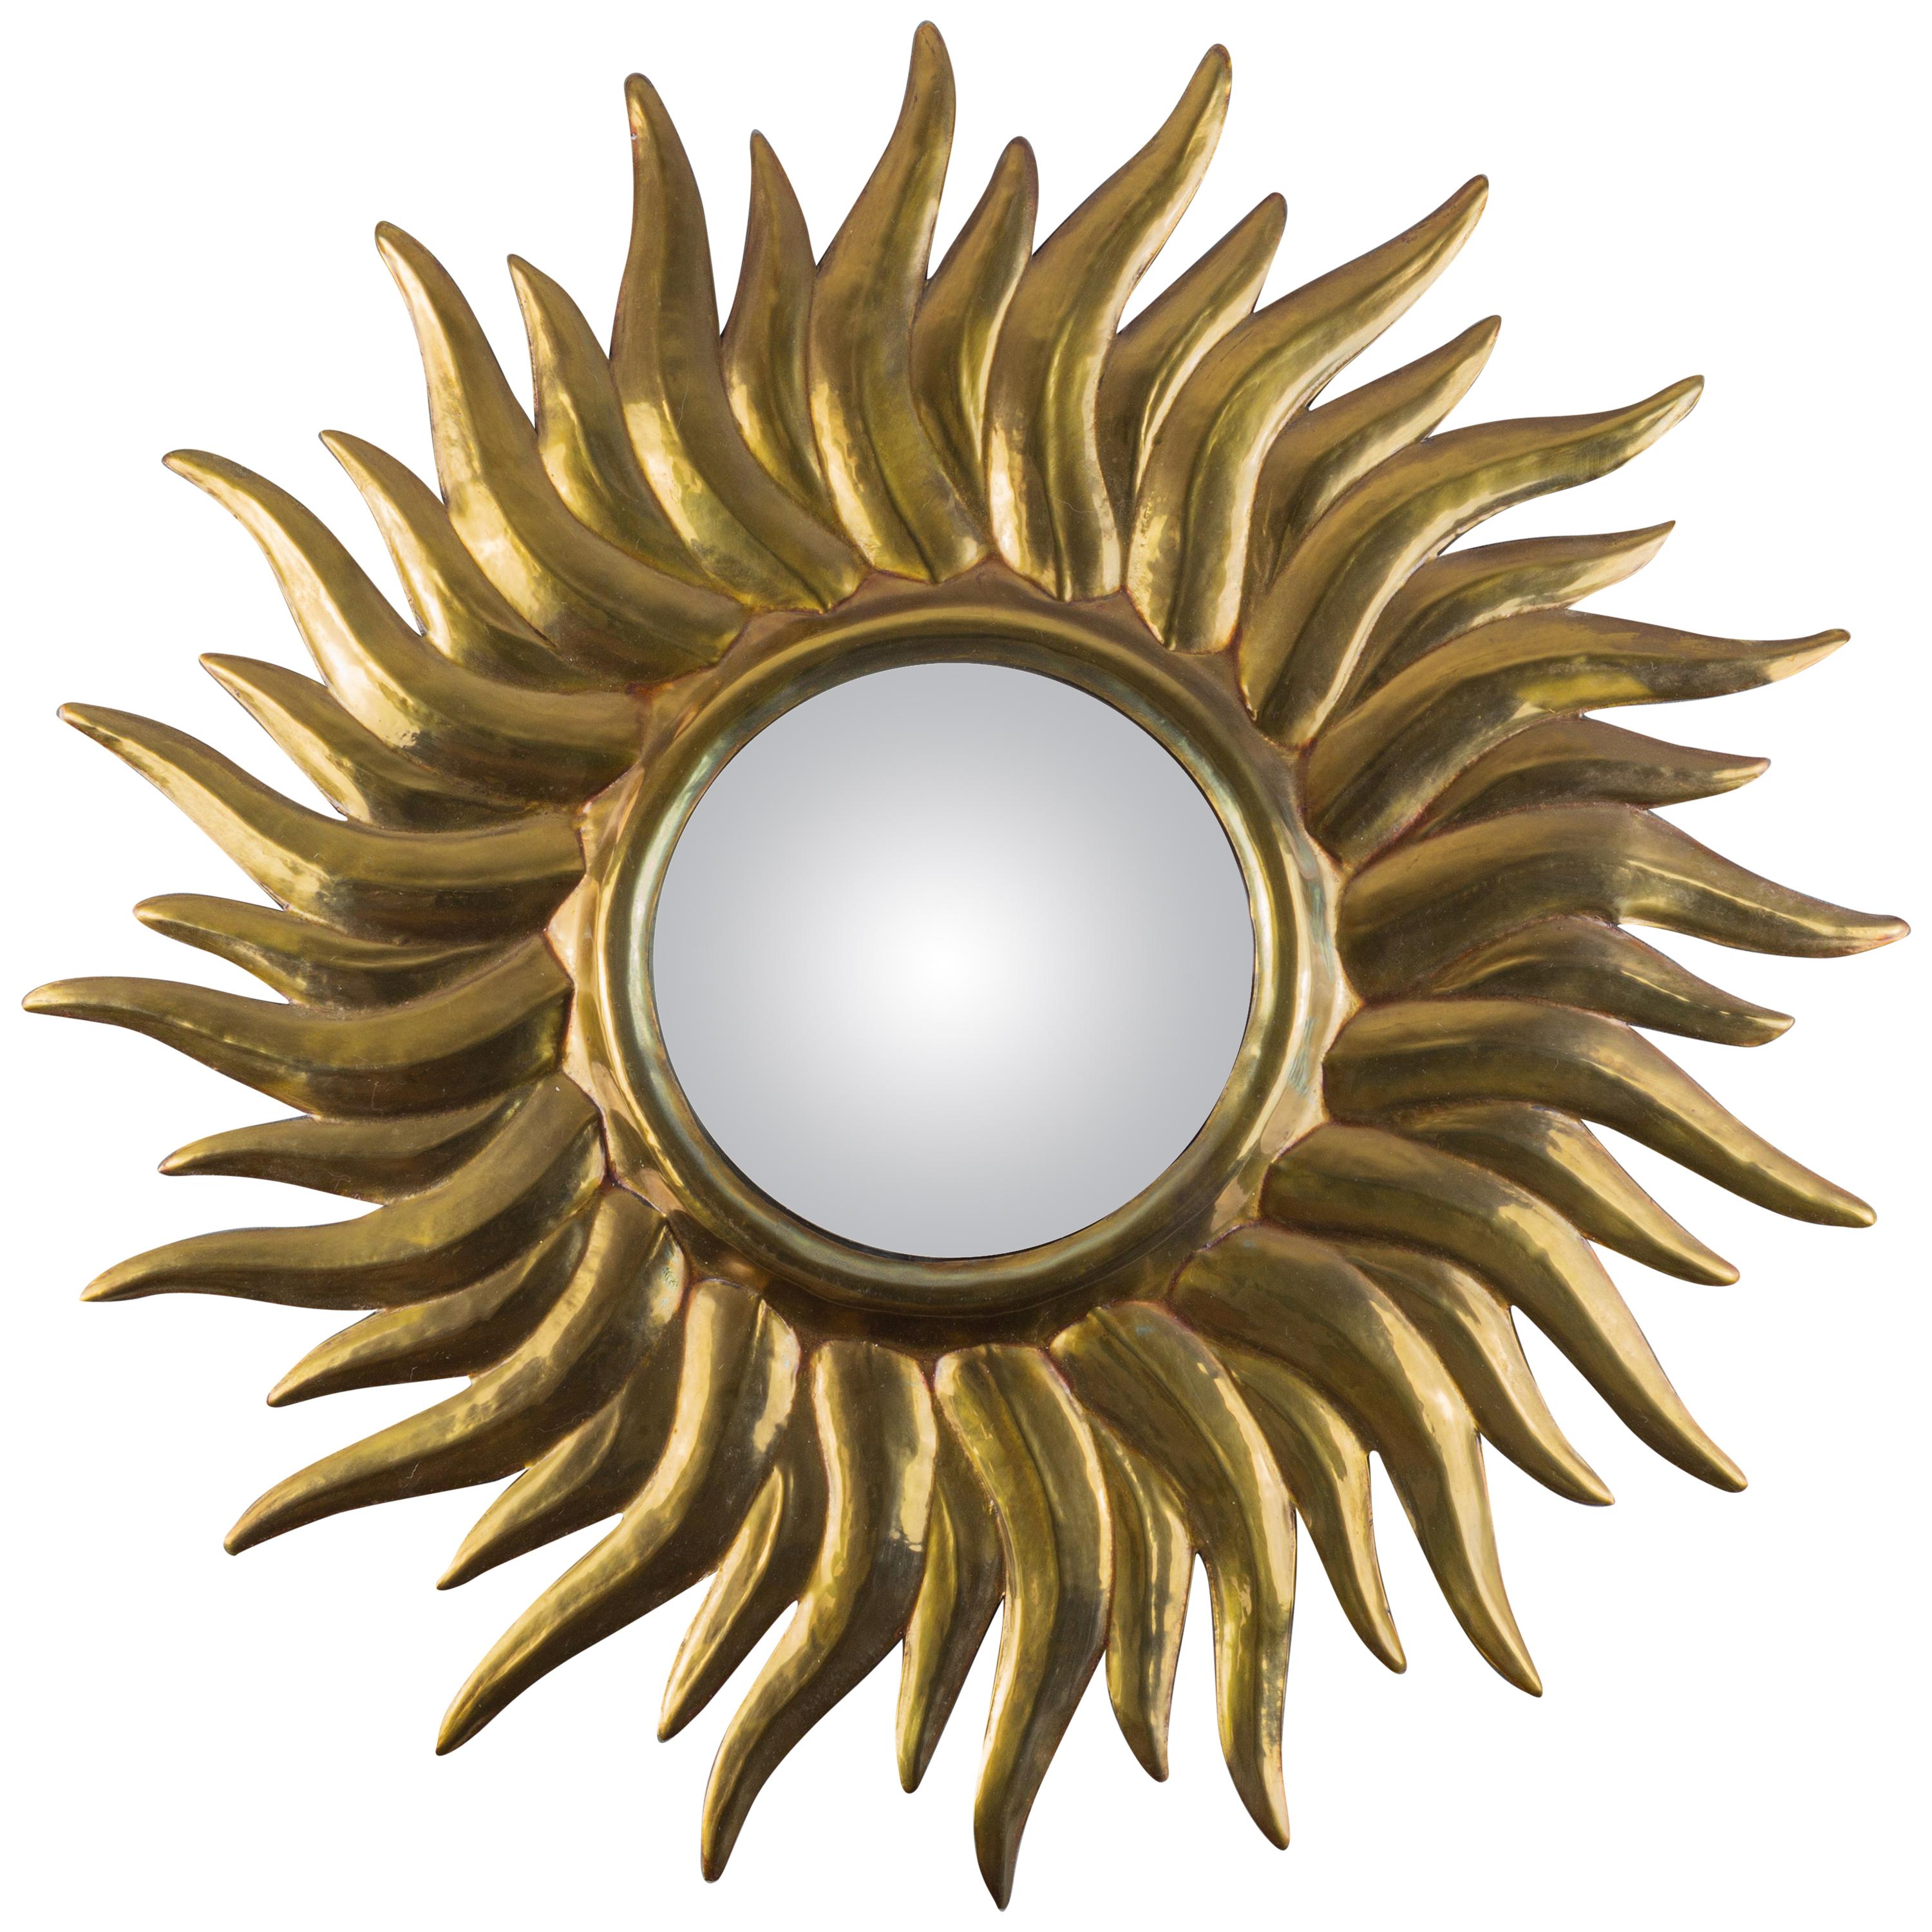 Antique French Sunburst Wall Mirror with Convex Mirror Glass, Late 19th Century